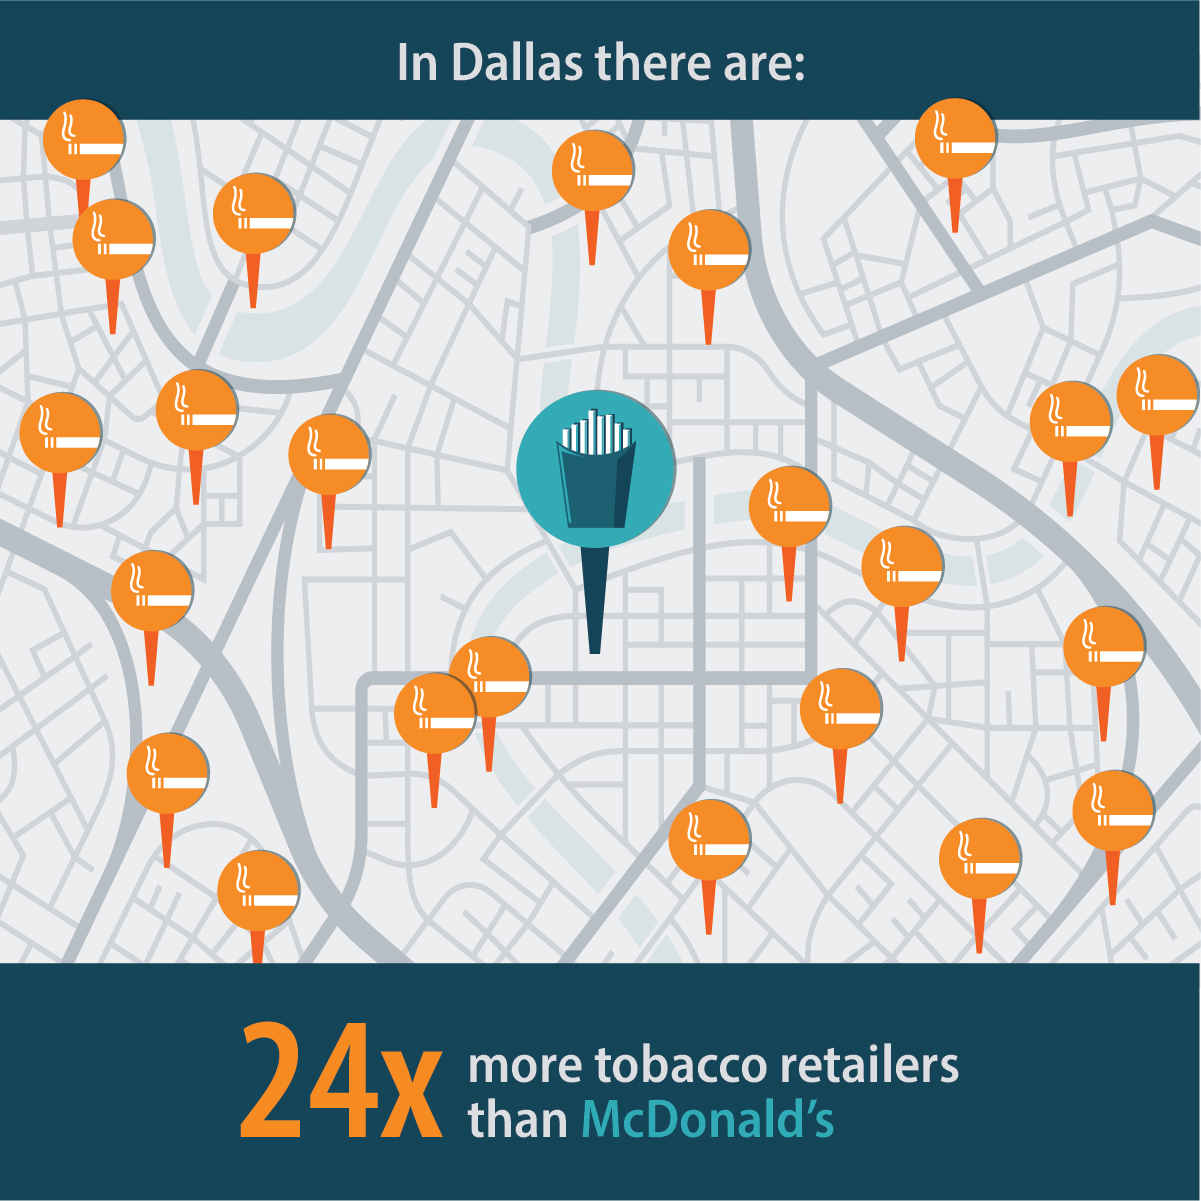 In Dallas there are: 24 times more tobacco retailers than McDonald's